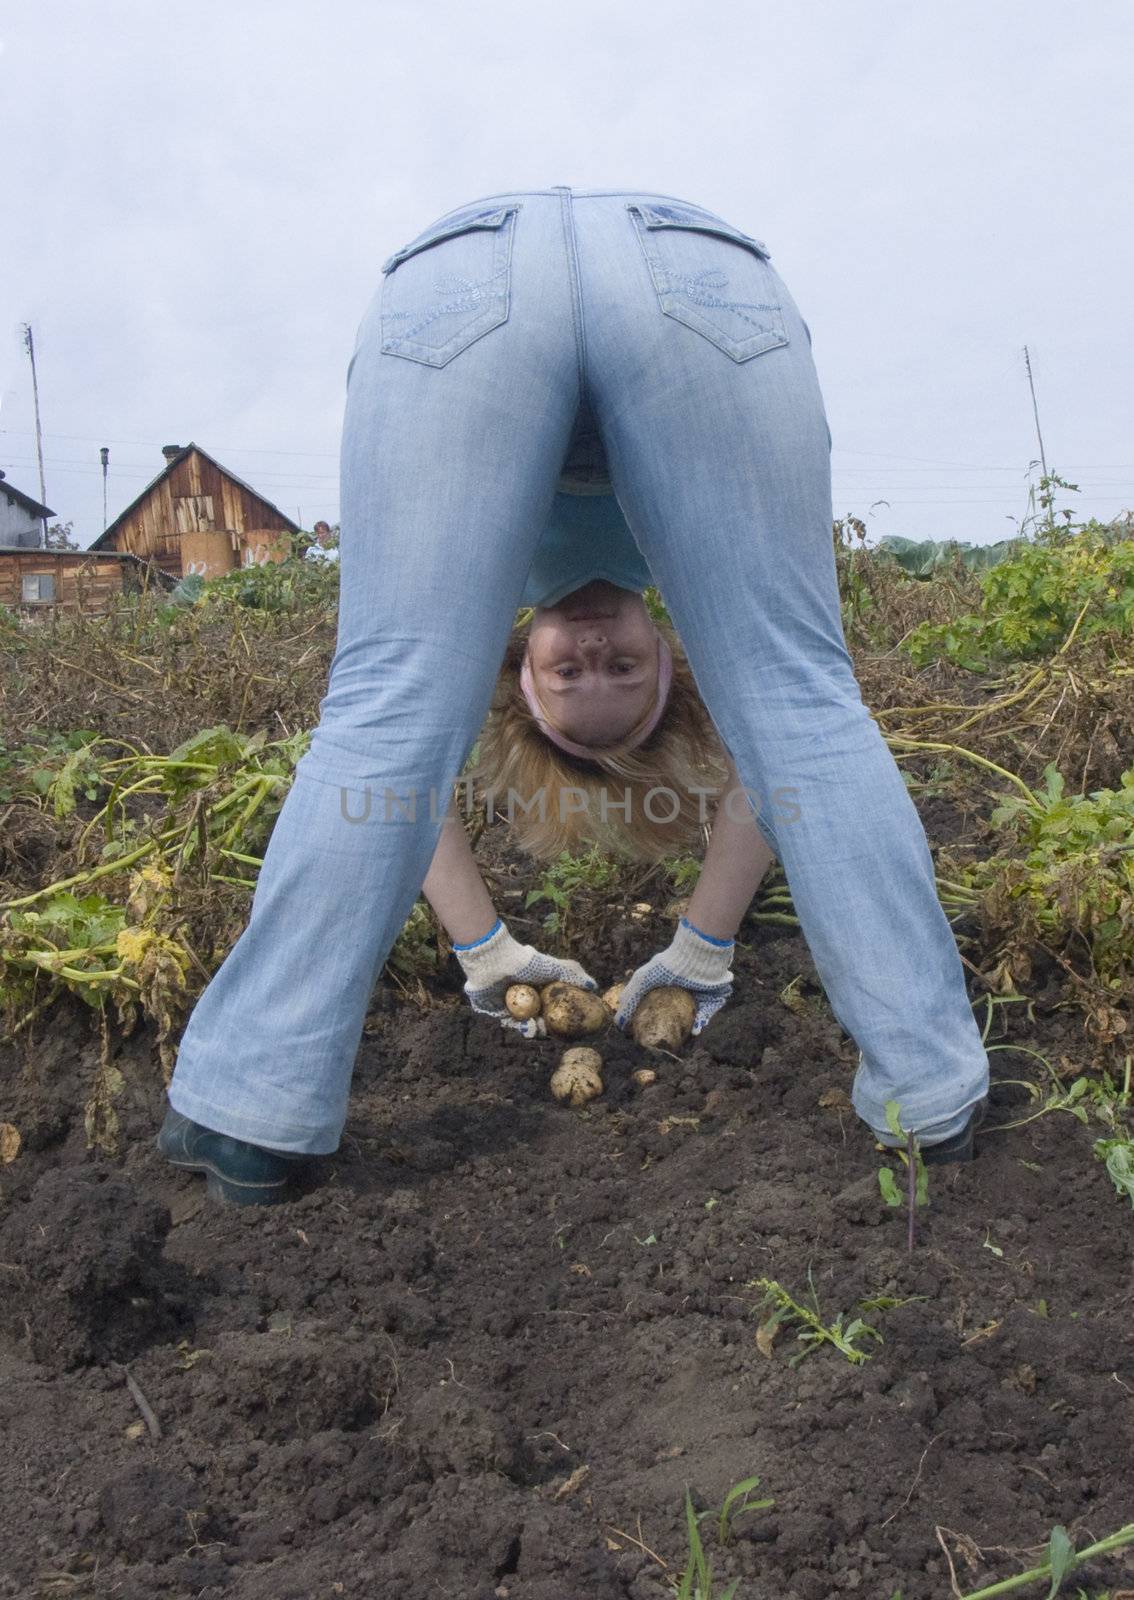 The image of the girl having control over a potato